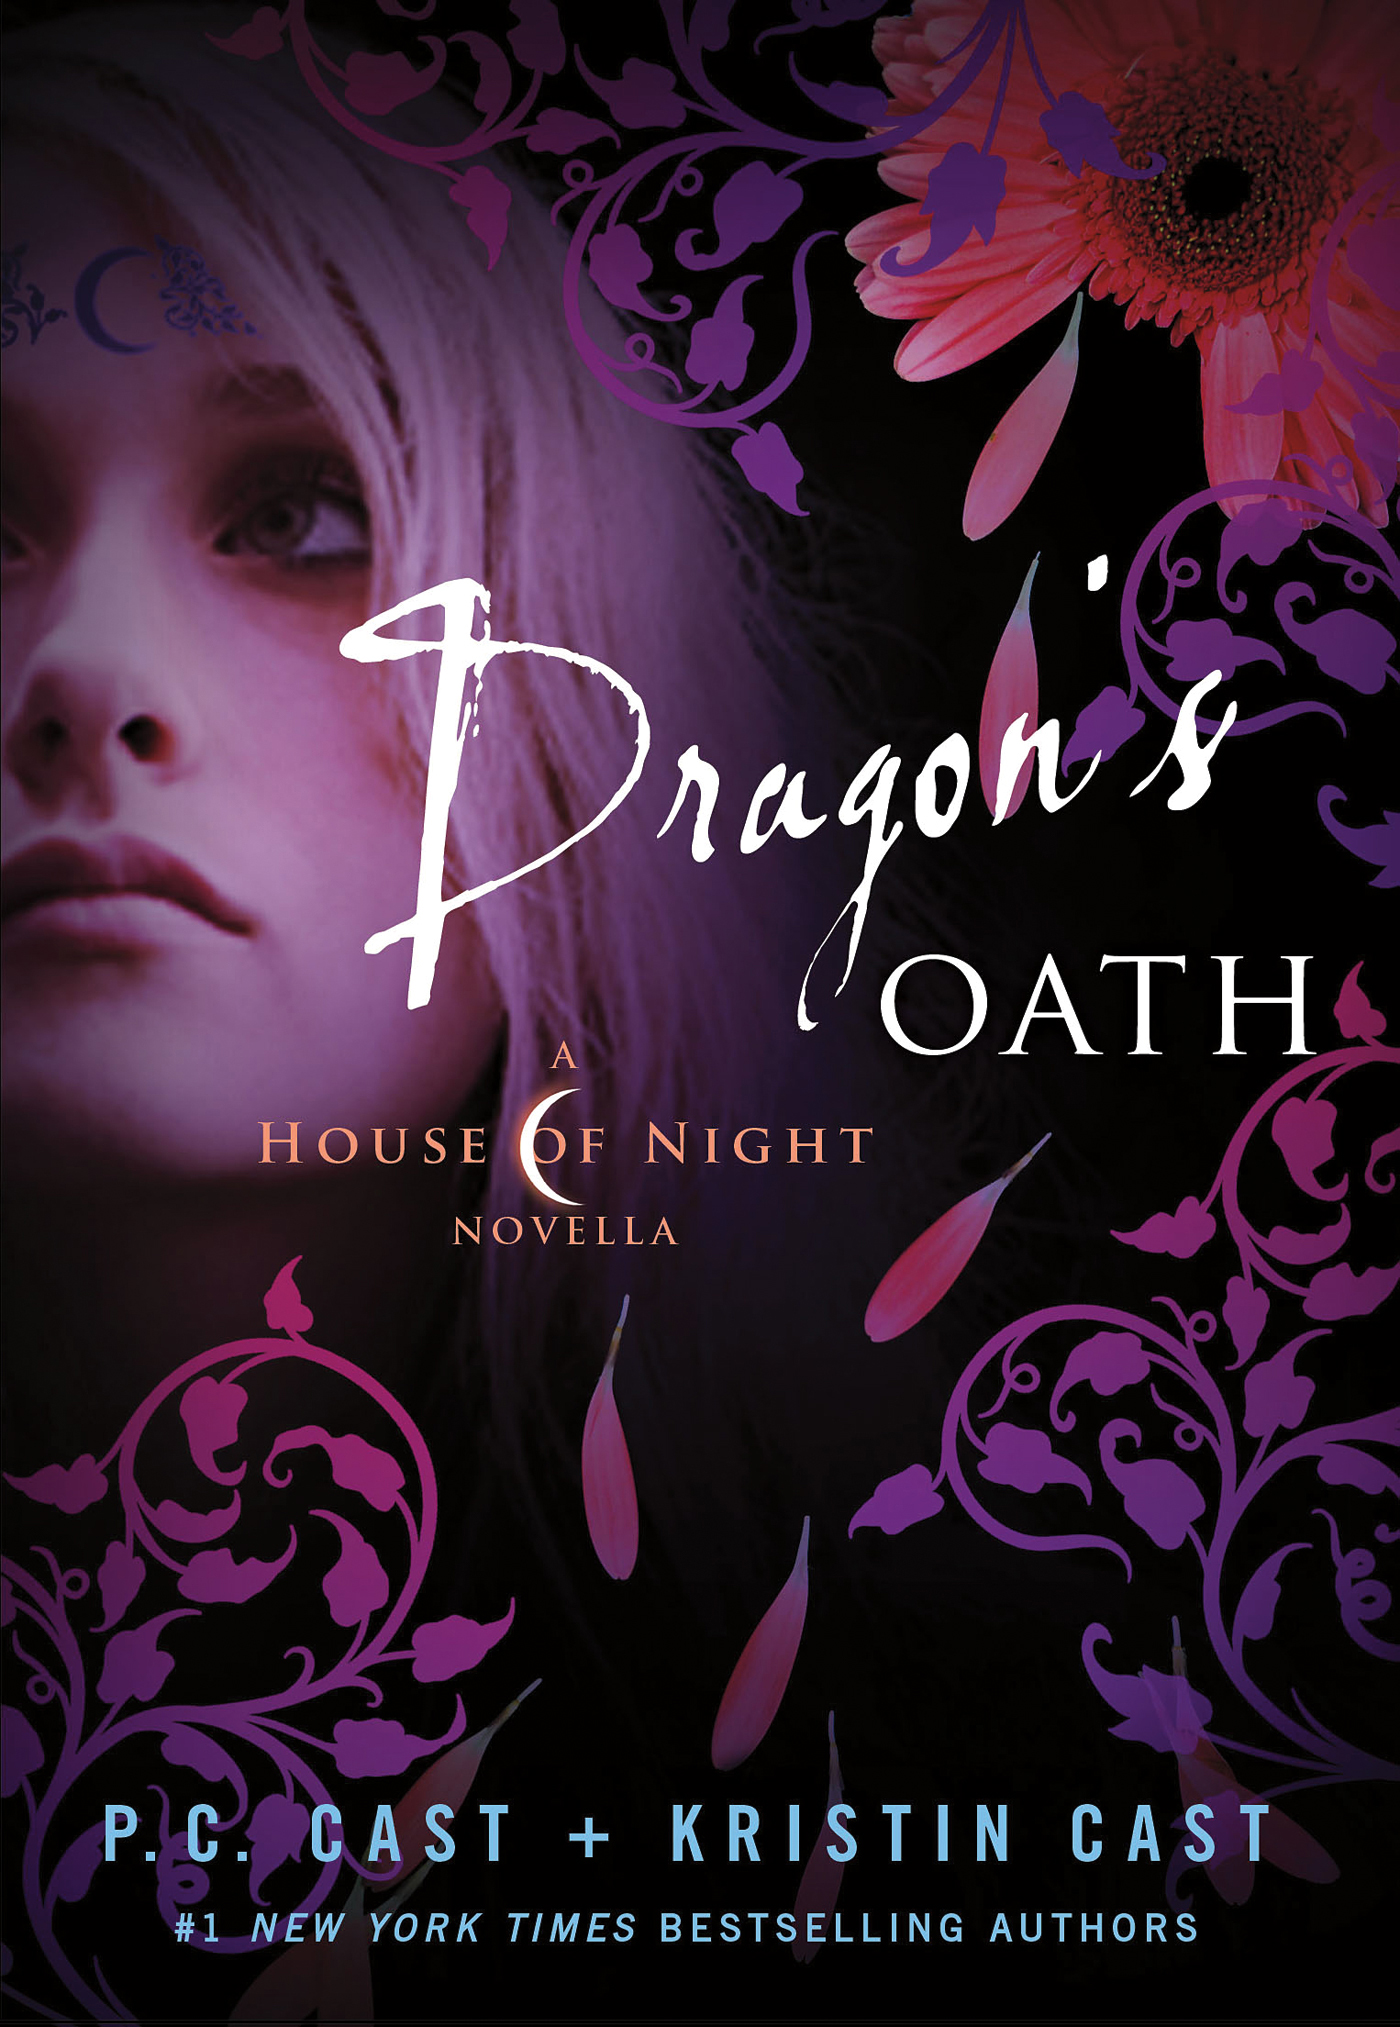 house of night novellas in order